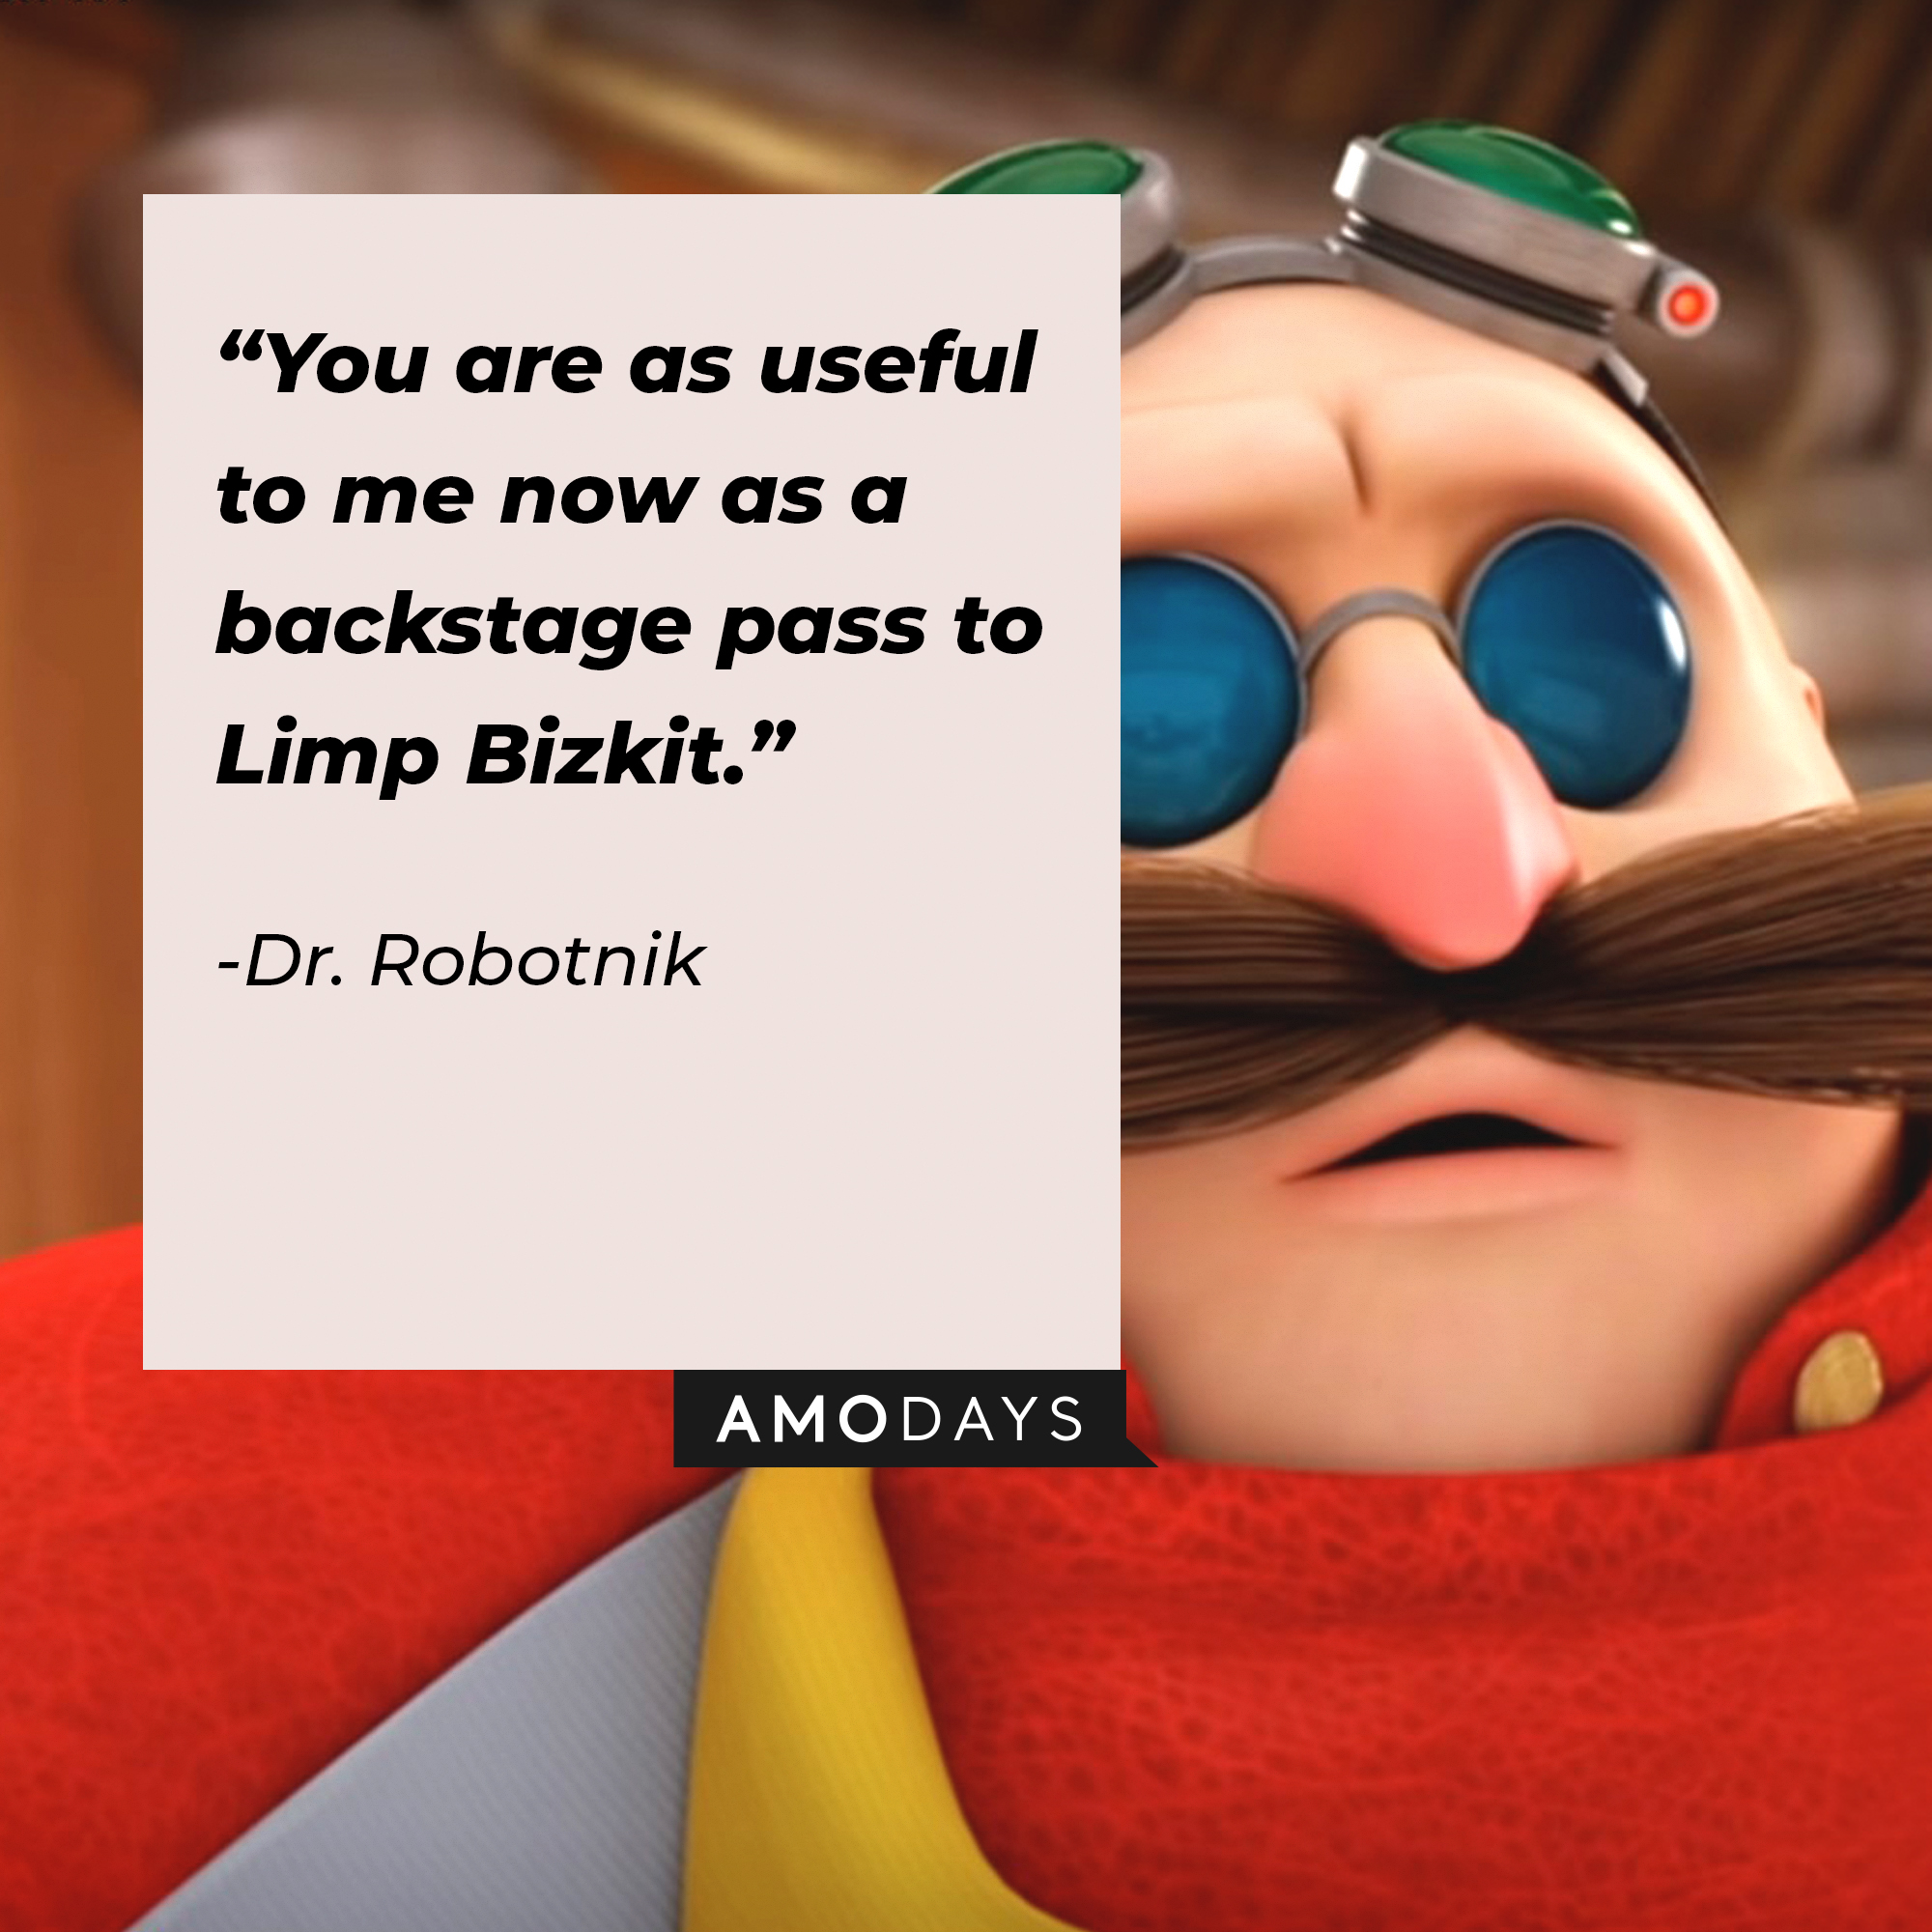 image of Dr. Robotnik with his quote:“You are as useful to me now as a backstage pass to Limp Bizkit.” | Source: youtube.com/Sonic.Boom_Official